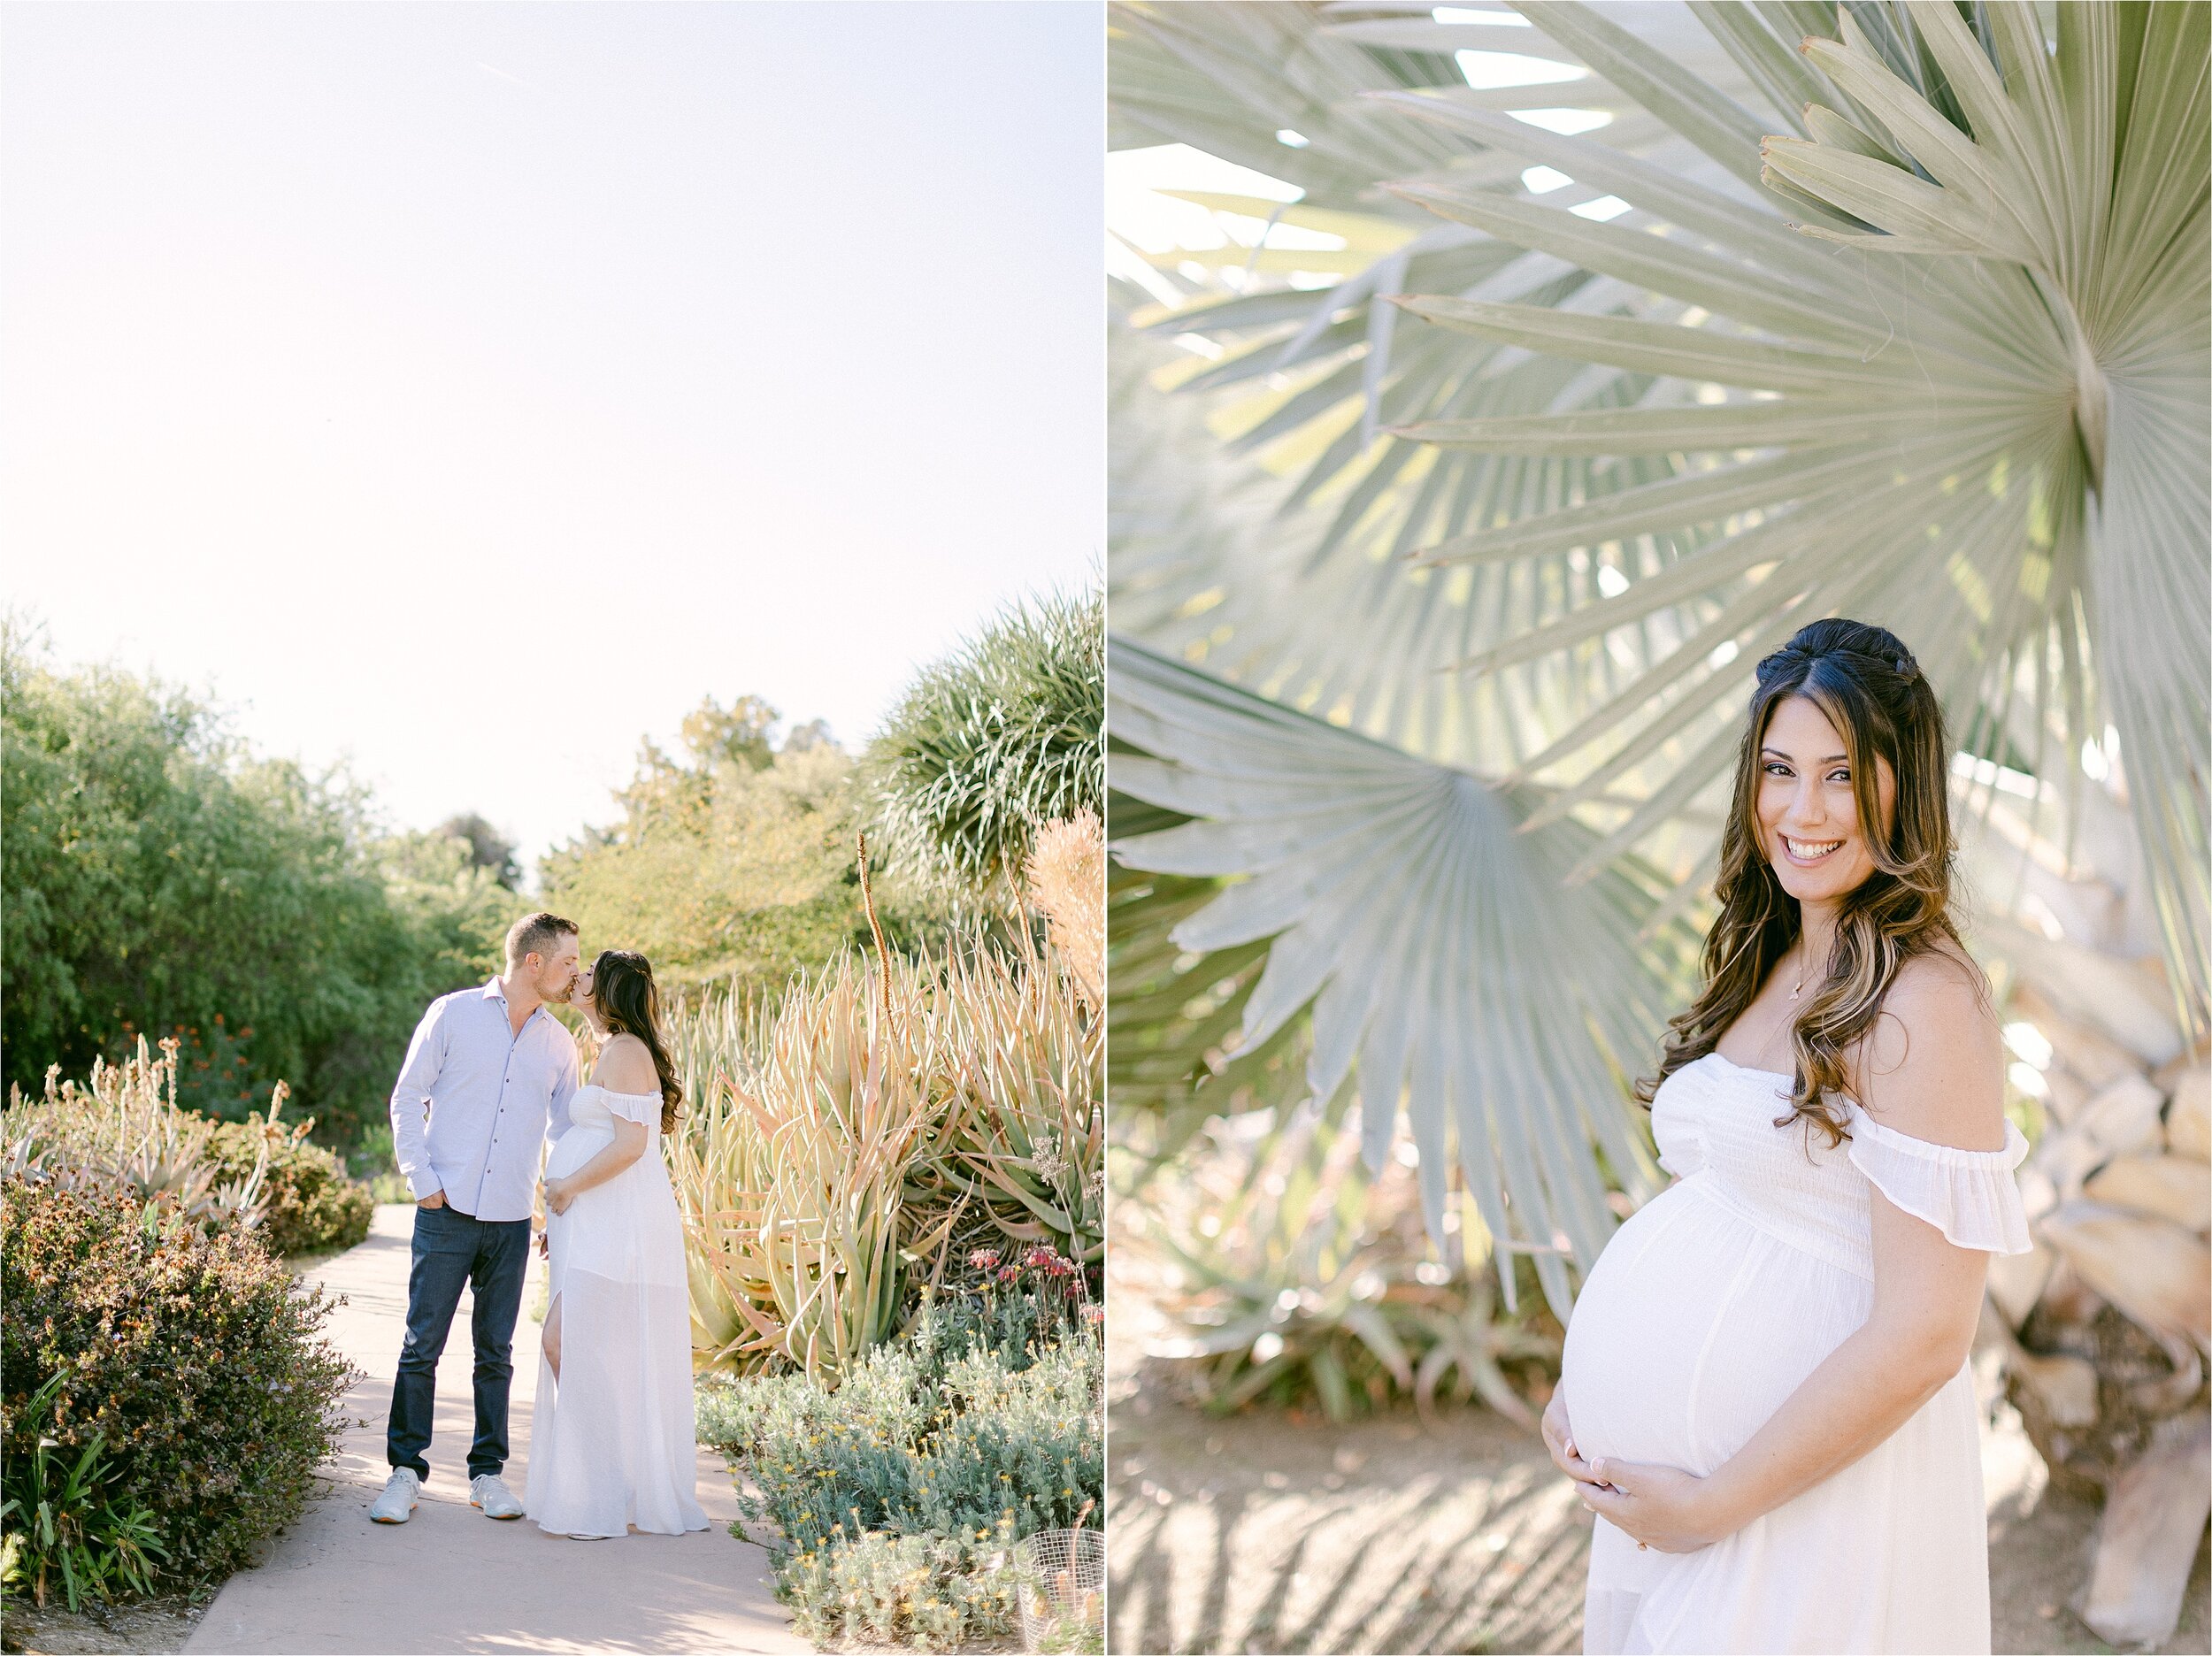 Expectant parents kiss as wife holds belly while taking maternity photos in a Los Angeles garden.